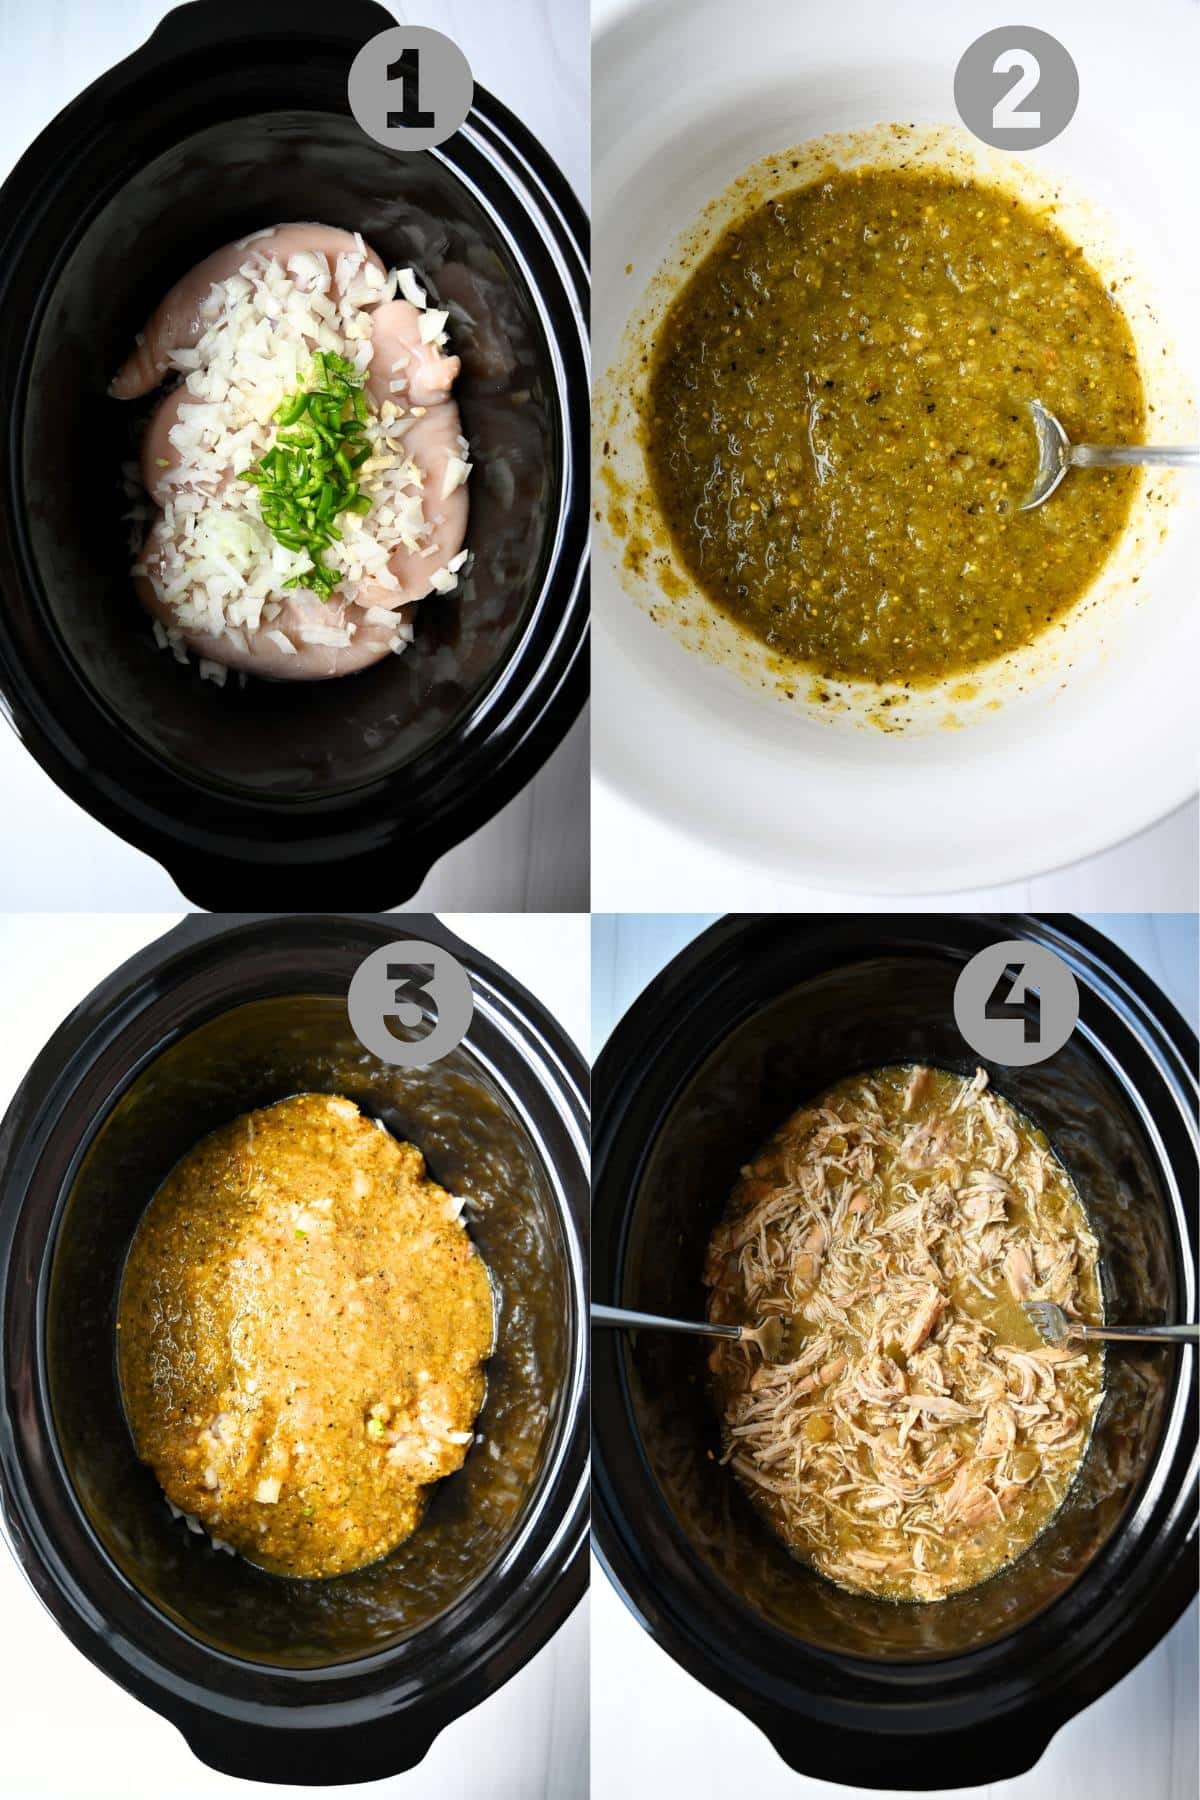 steps for cooking salsa verde chicken in a slow cooker: ingredients in a crockpot, sauce mixed, poured on top, and cooked and shredded